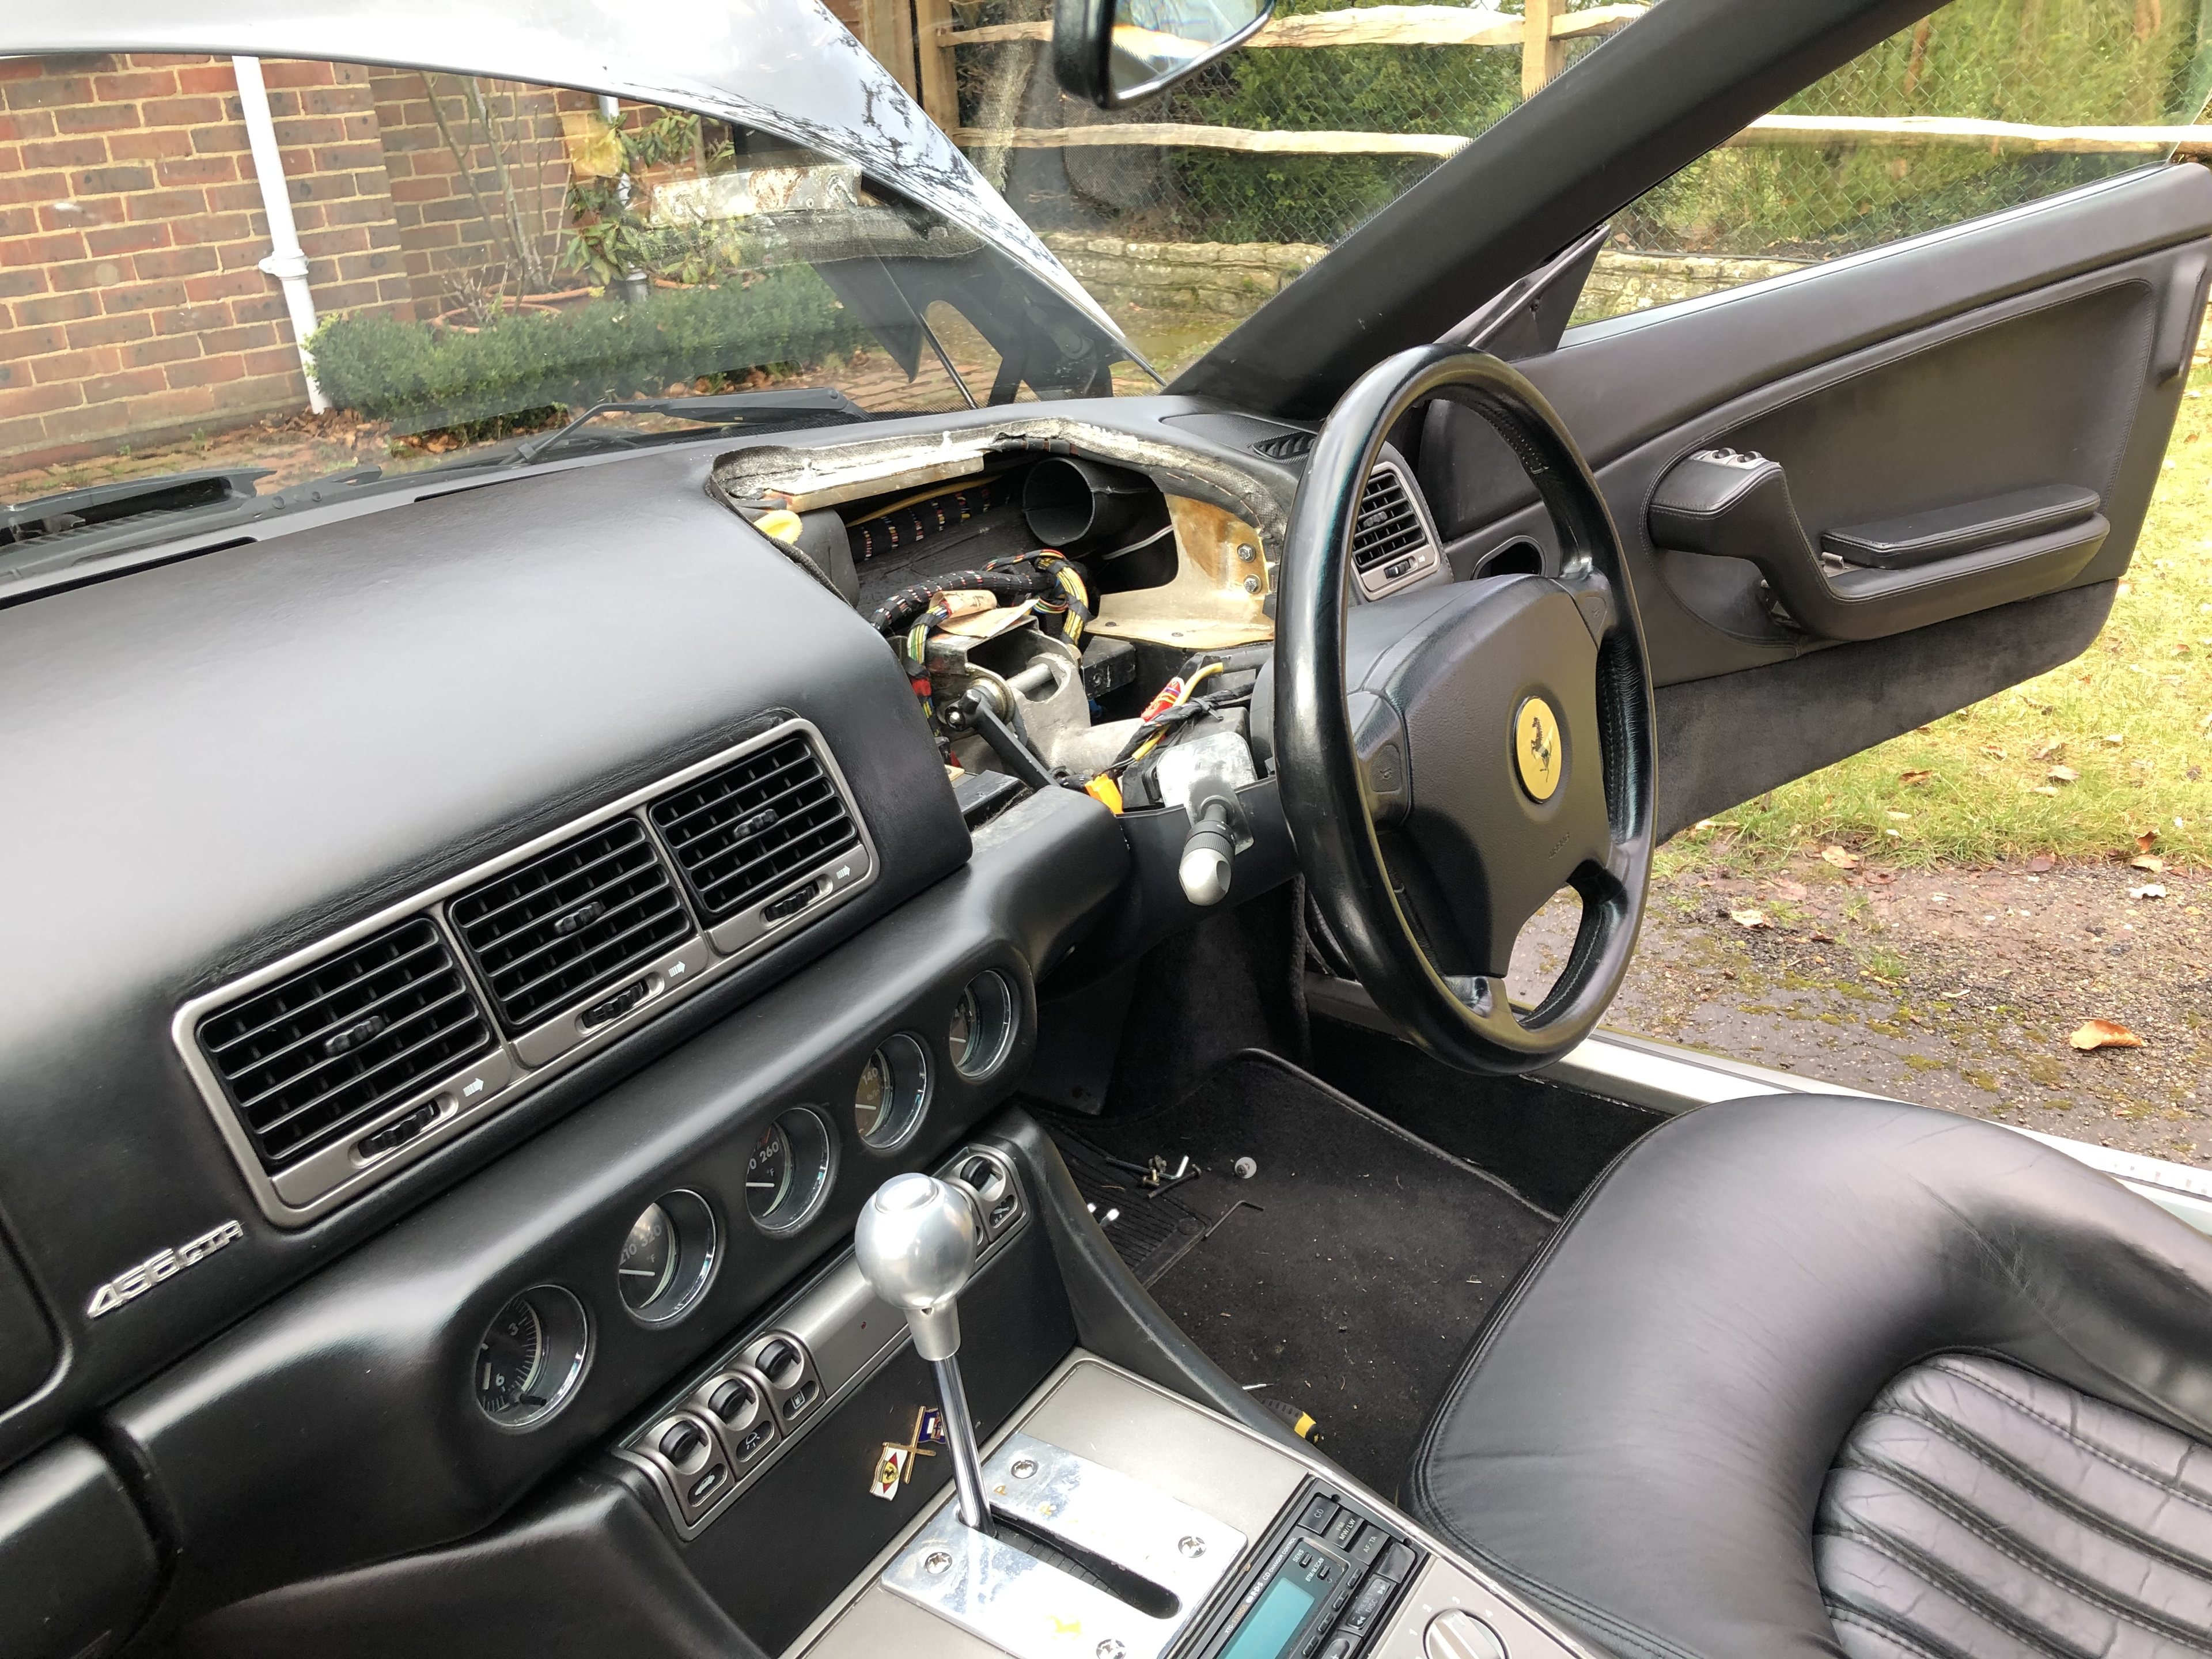 97 Ferrari 456 GTA bought in auction - Page 13 - Readers' Cars - PistonHeads UK